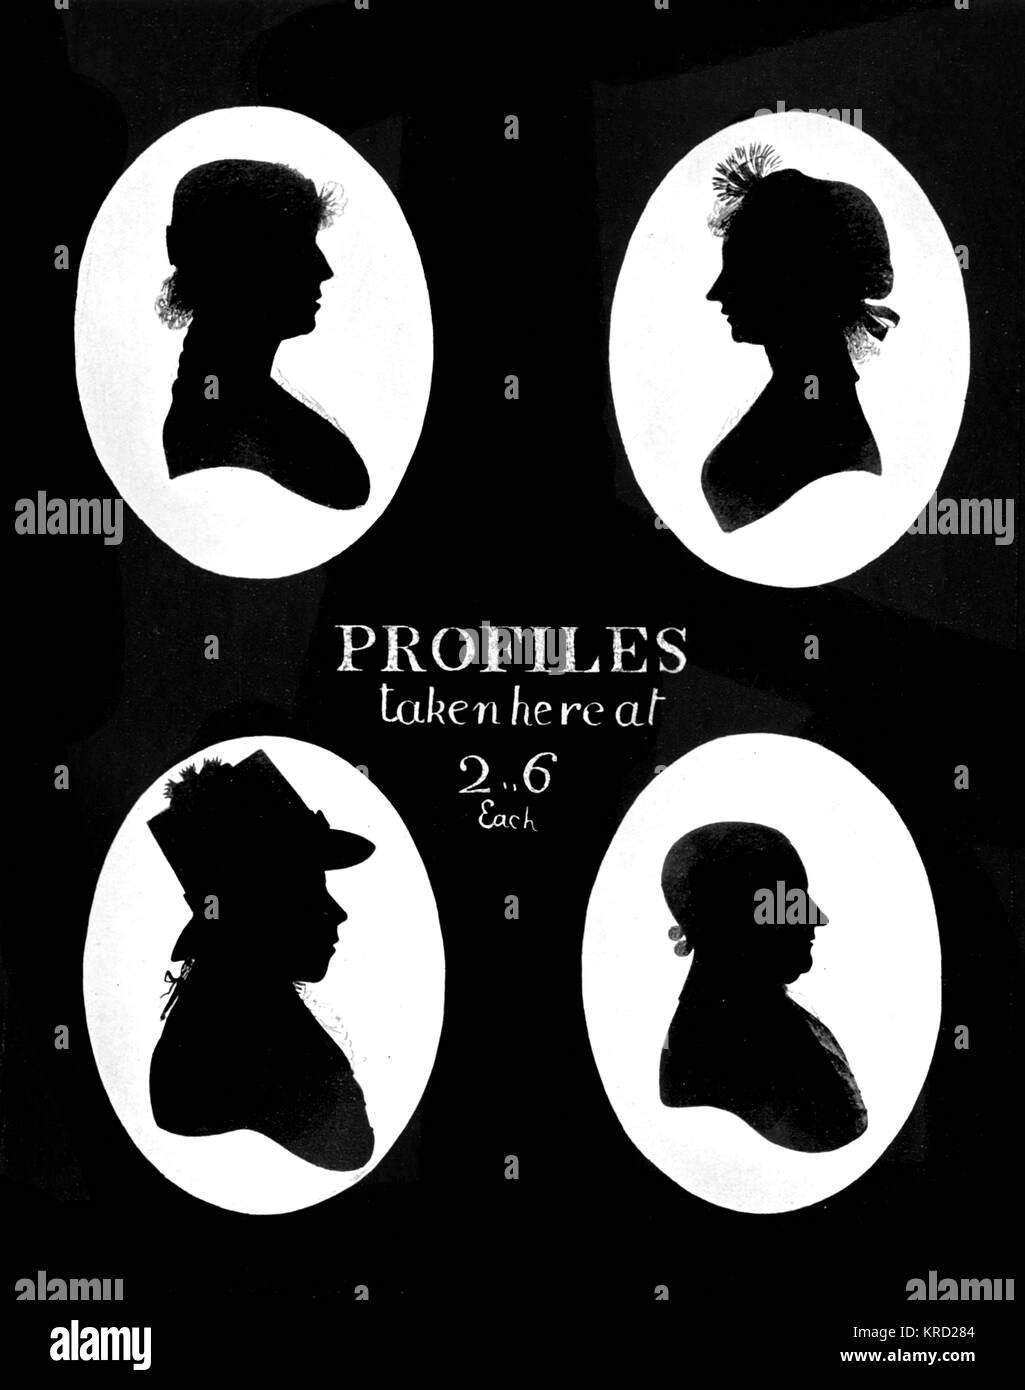 Advertisement for a silhouettist, or silhouette artist, publicising, 'profiles taken here at 2, 6' each'.     Date: c. 1810 Stock Photo